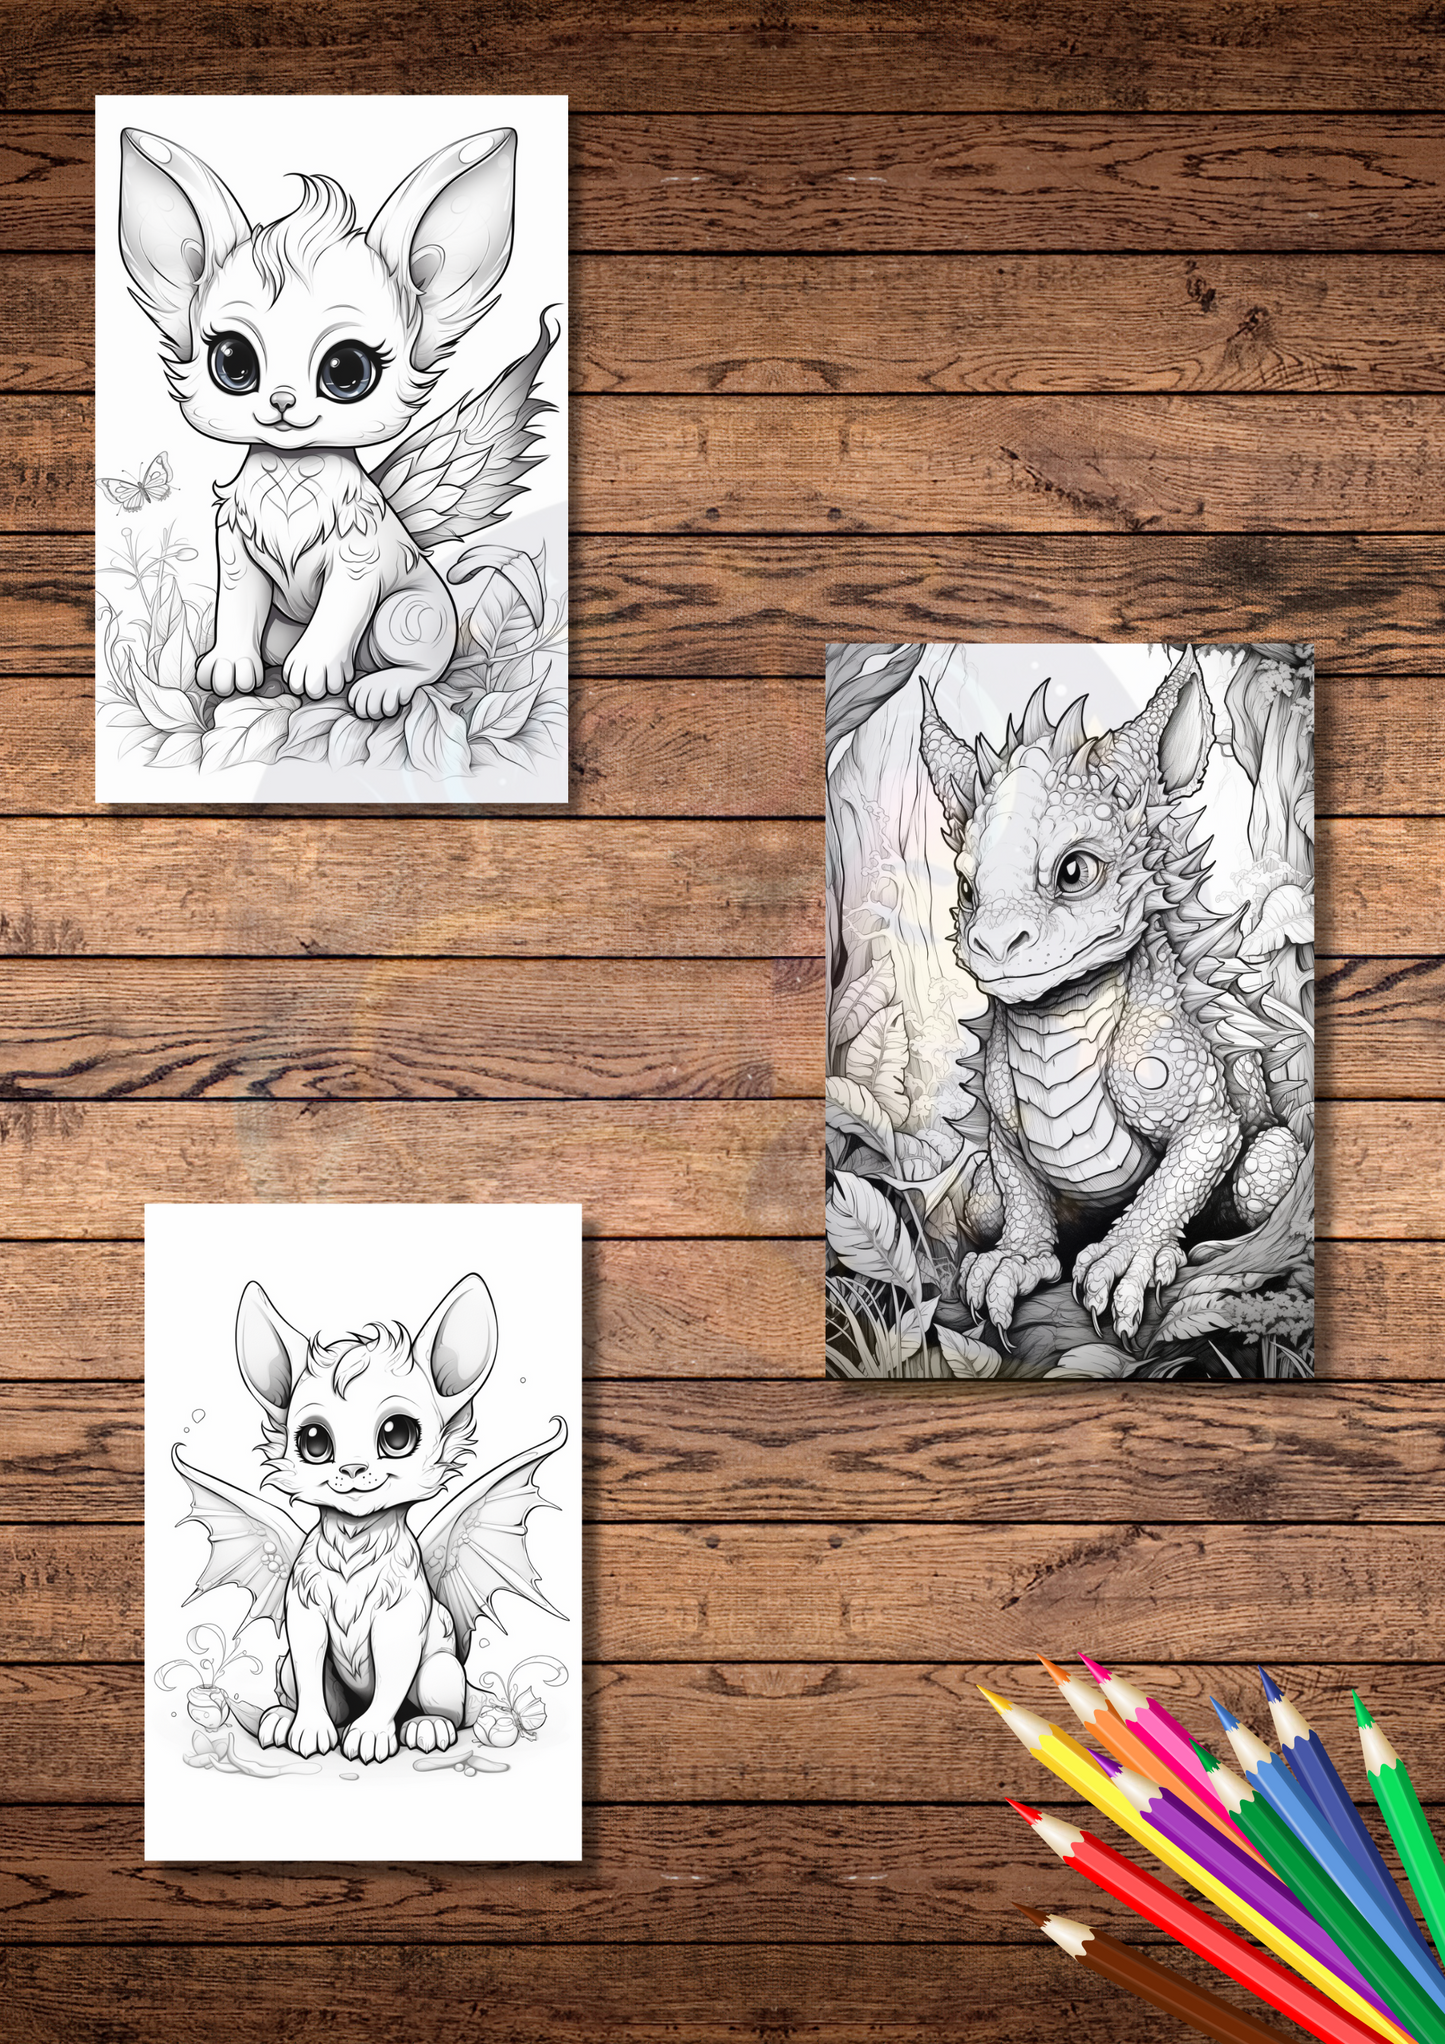 20 Dragon cats coloring pages, instant download grey scale coloring sheets, downloadable & printable coloring pages, fun for adults & kids, dragons coloring